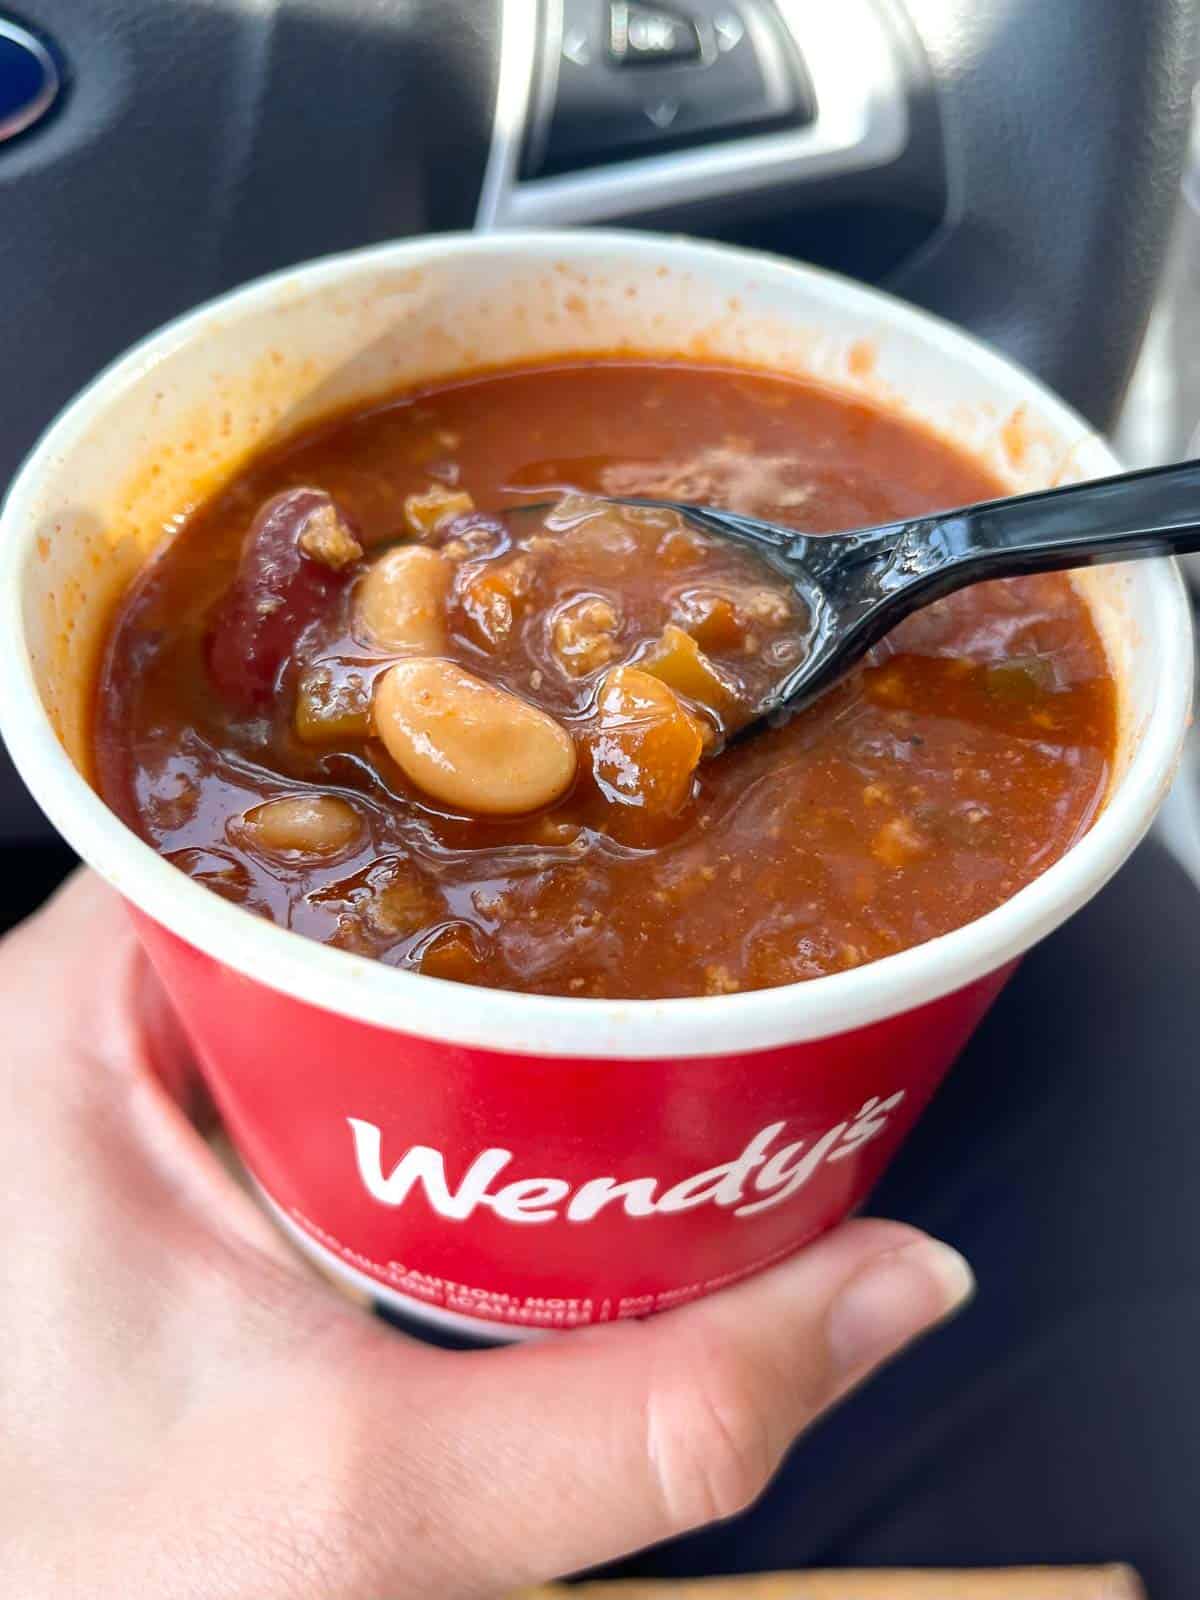 Wendy's chili in a cup with a spoon in it